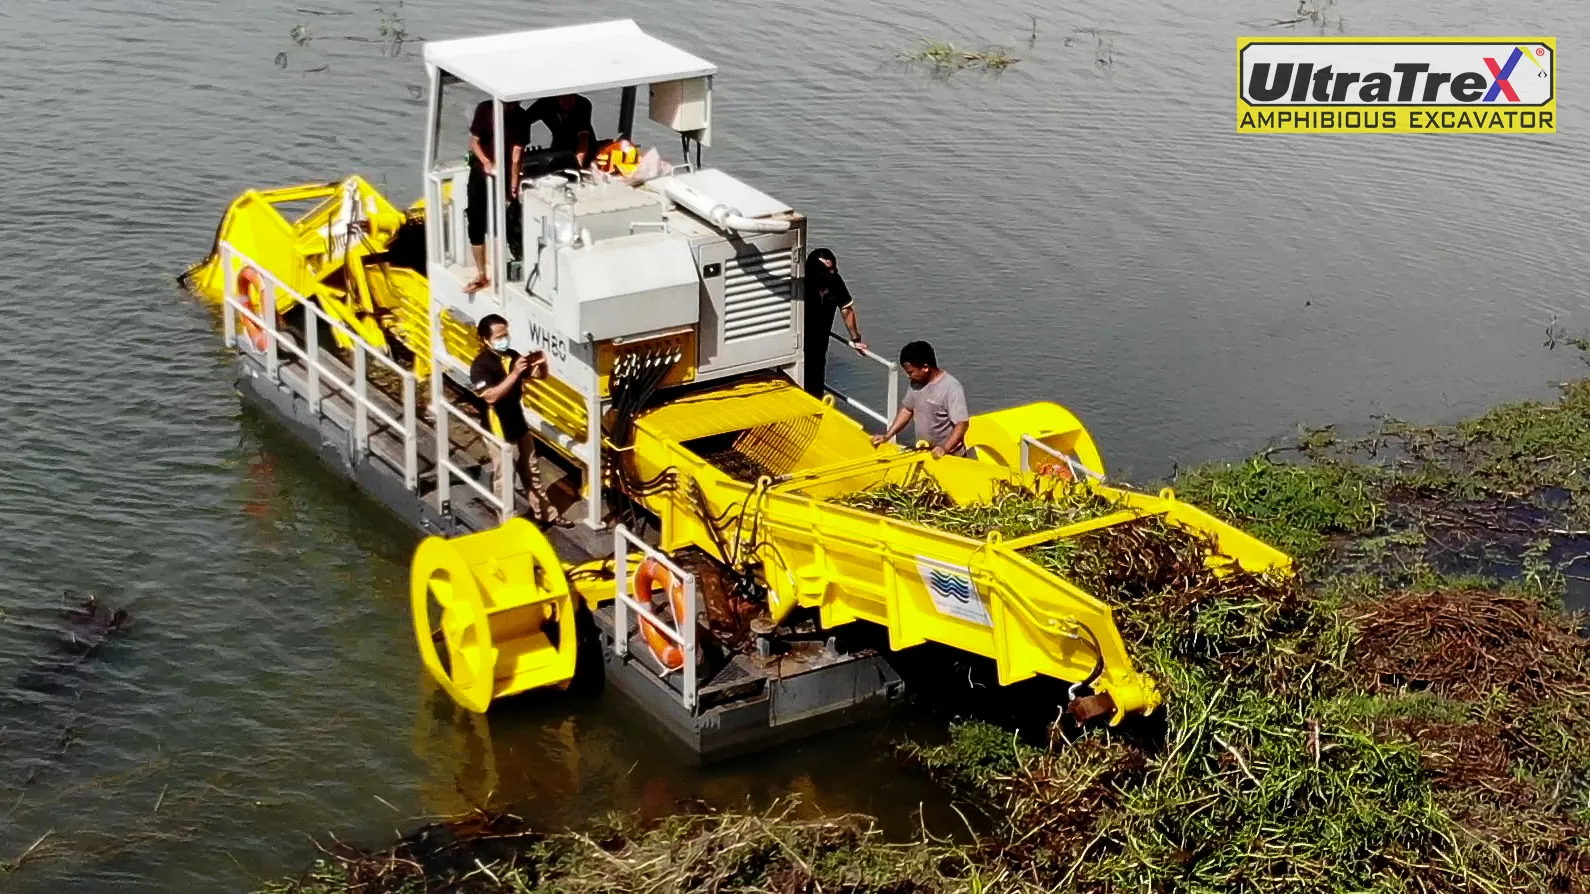 Ultratrex Aquatic Weed Harvester WH80-2 working for maintenance of water reservoir project in Malaysia.